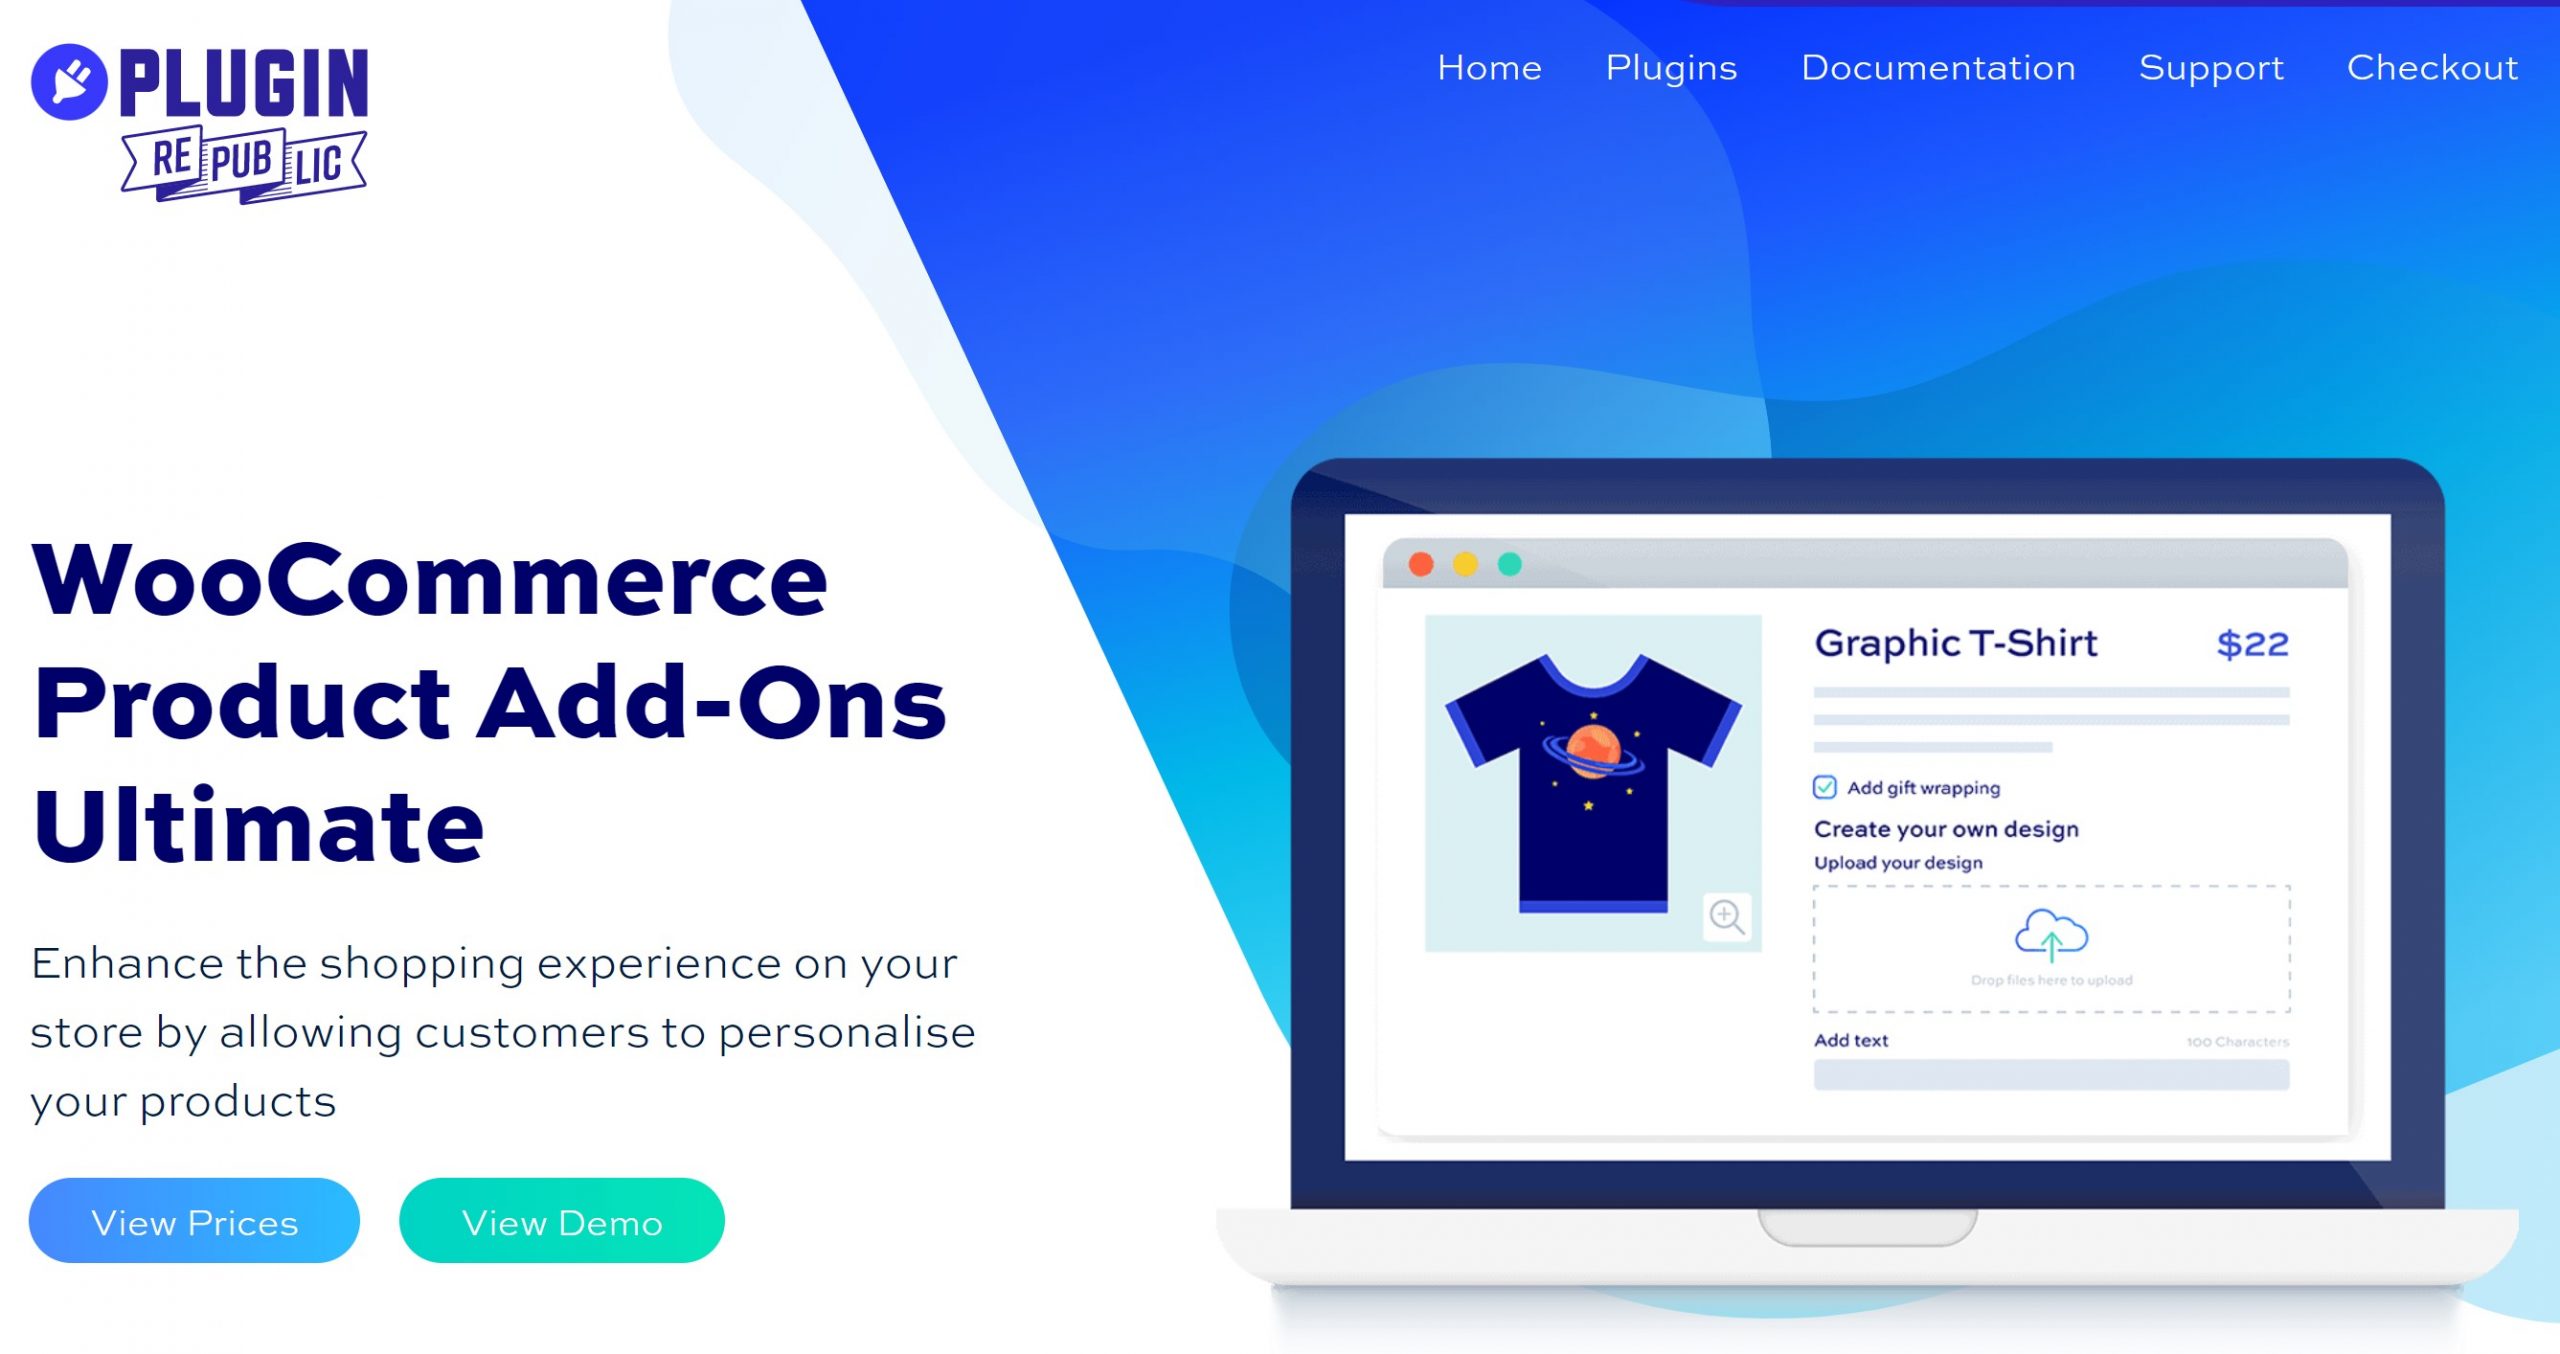 WooCommerce Product Add-Ons Ultimate 3.9.6 by Plugin Republic